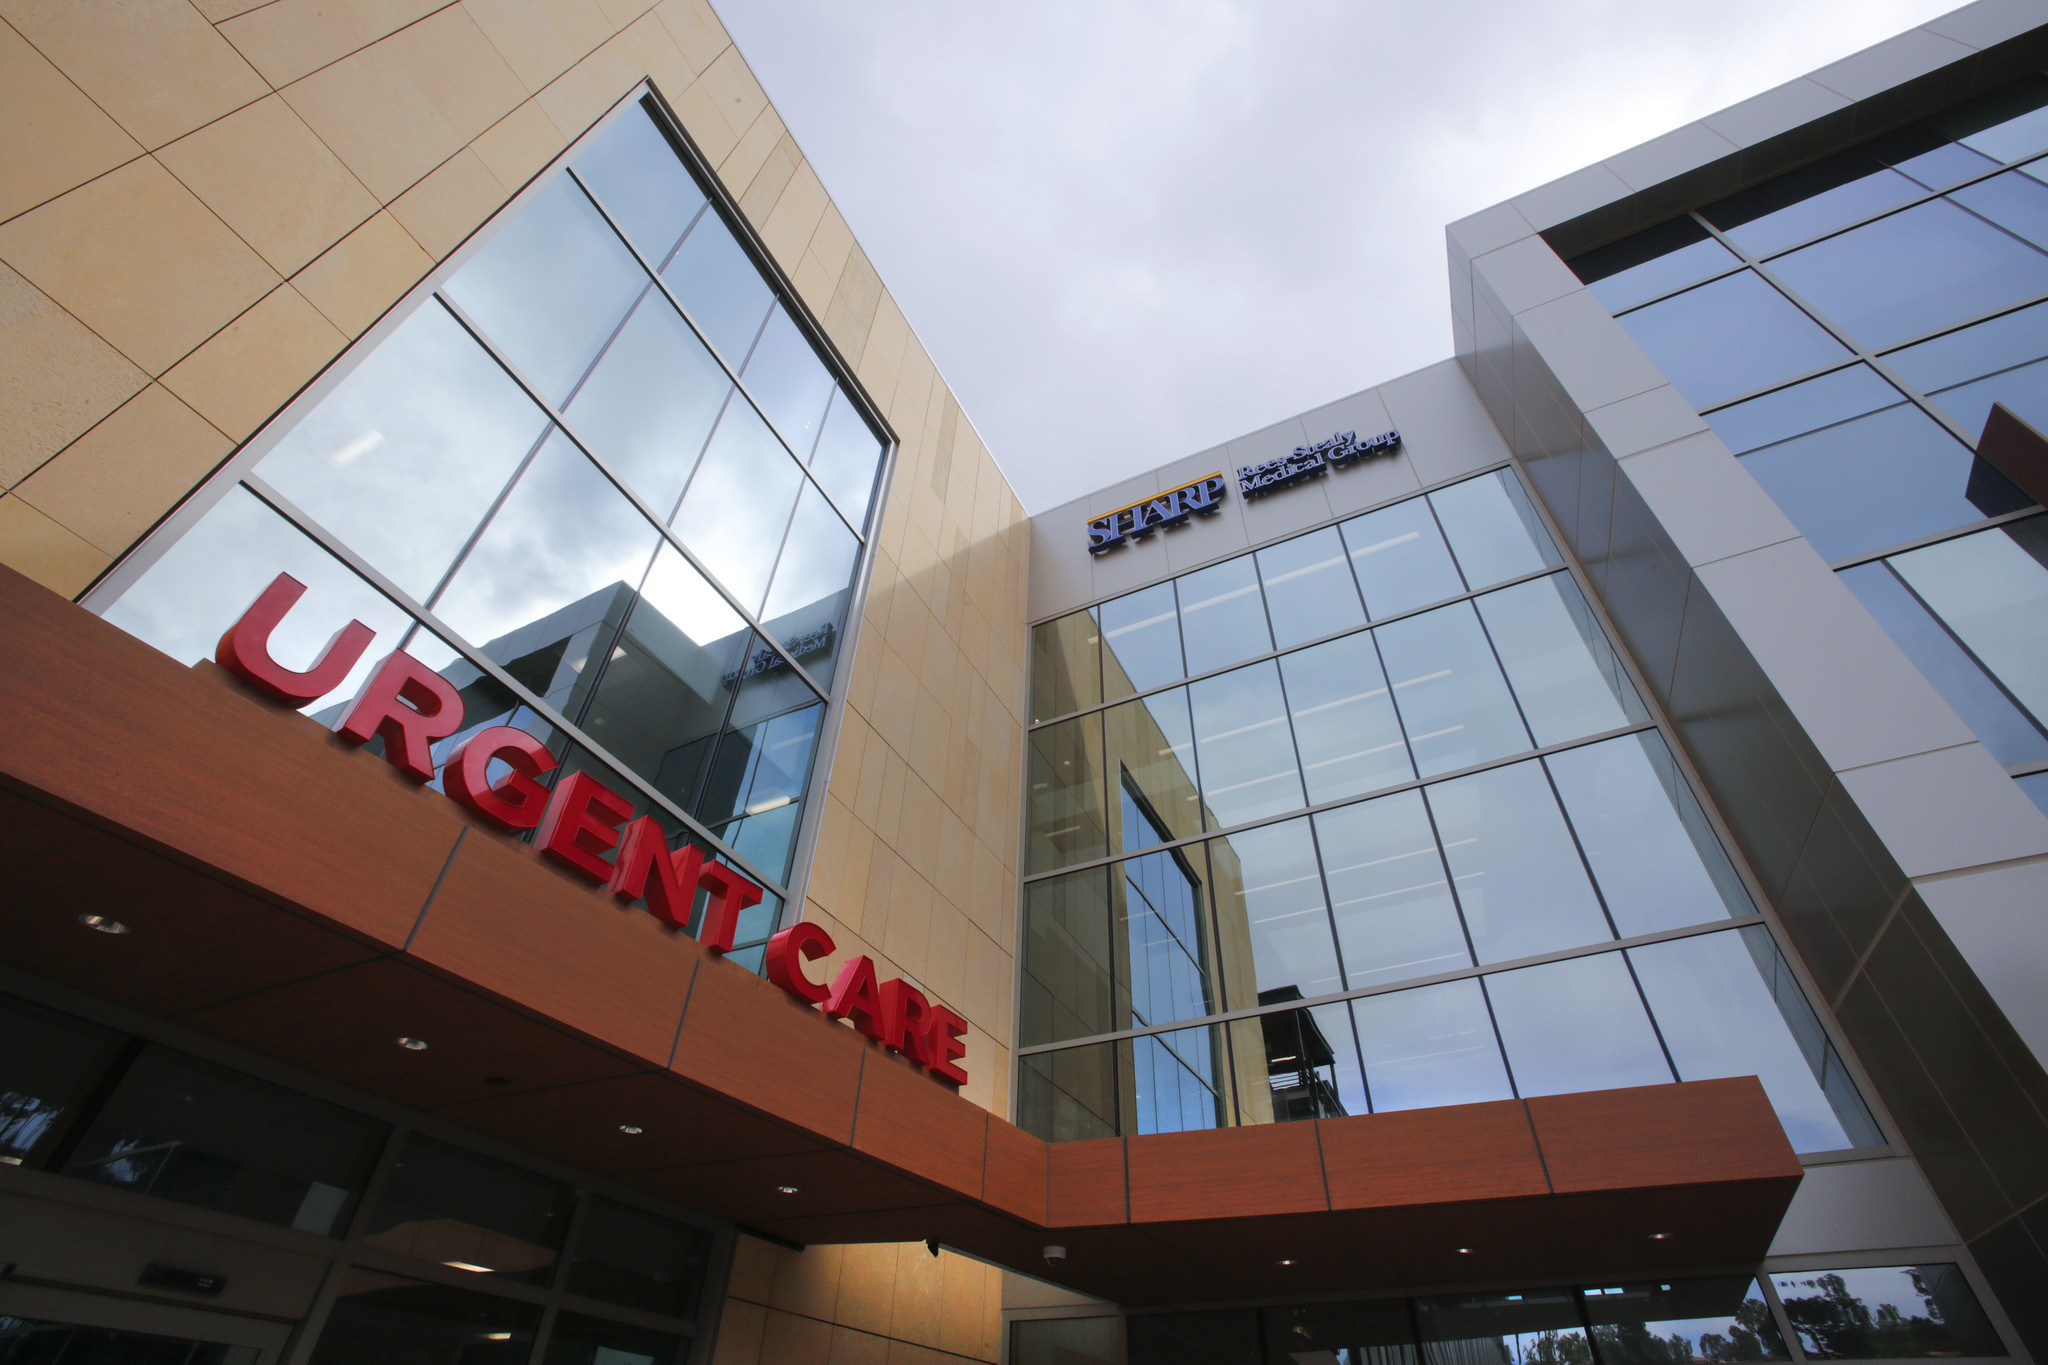 Sharp increases presence in North County with new health clinic